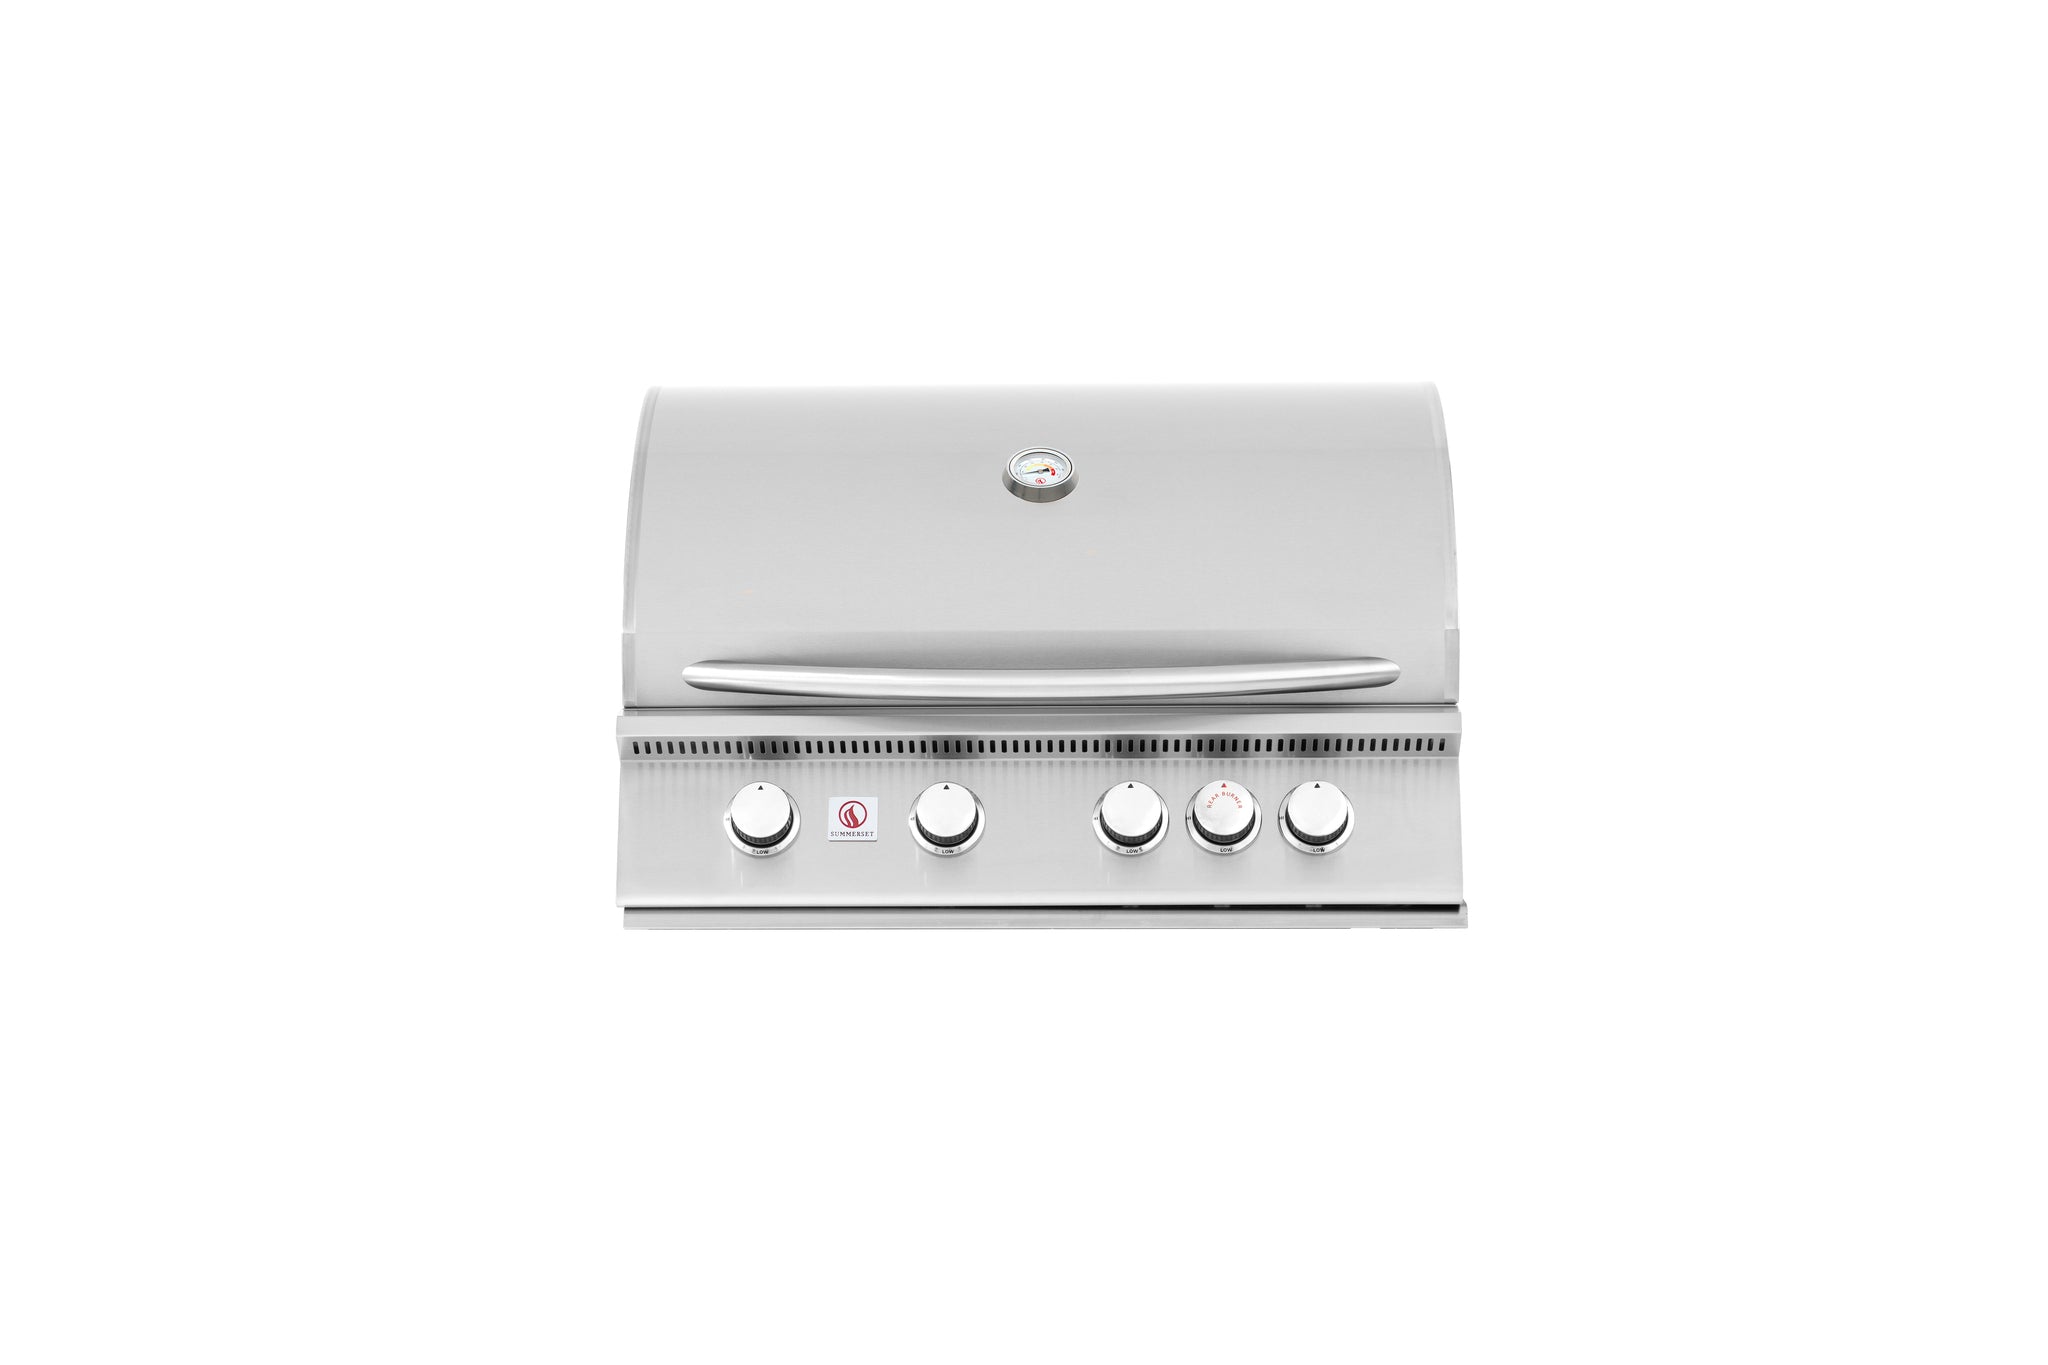 Summerset Sizzler Series Built-in Grill